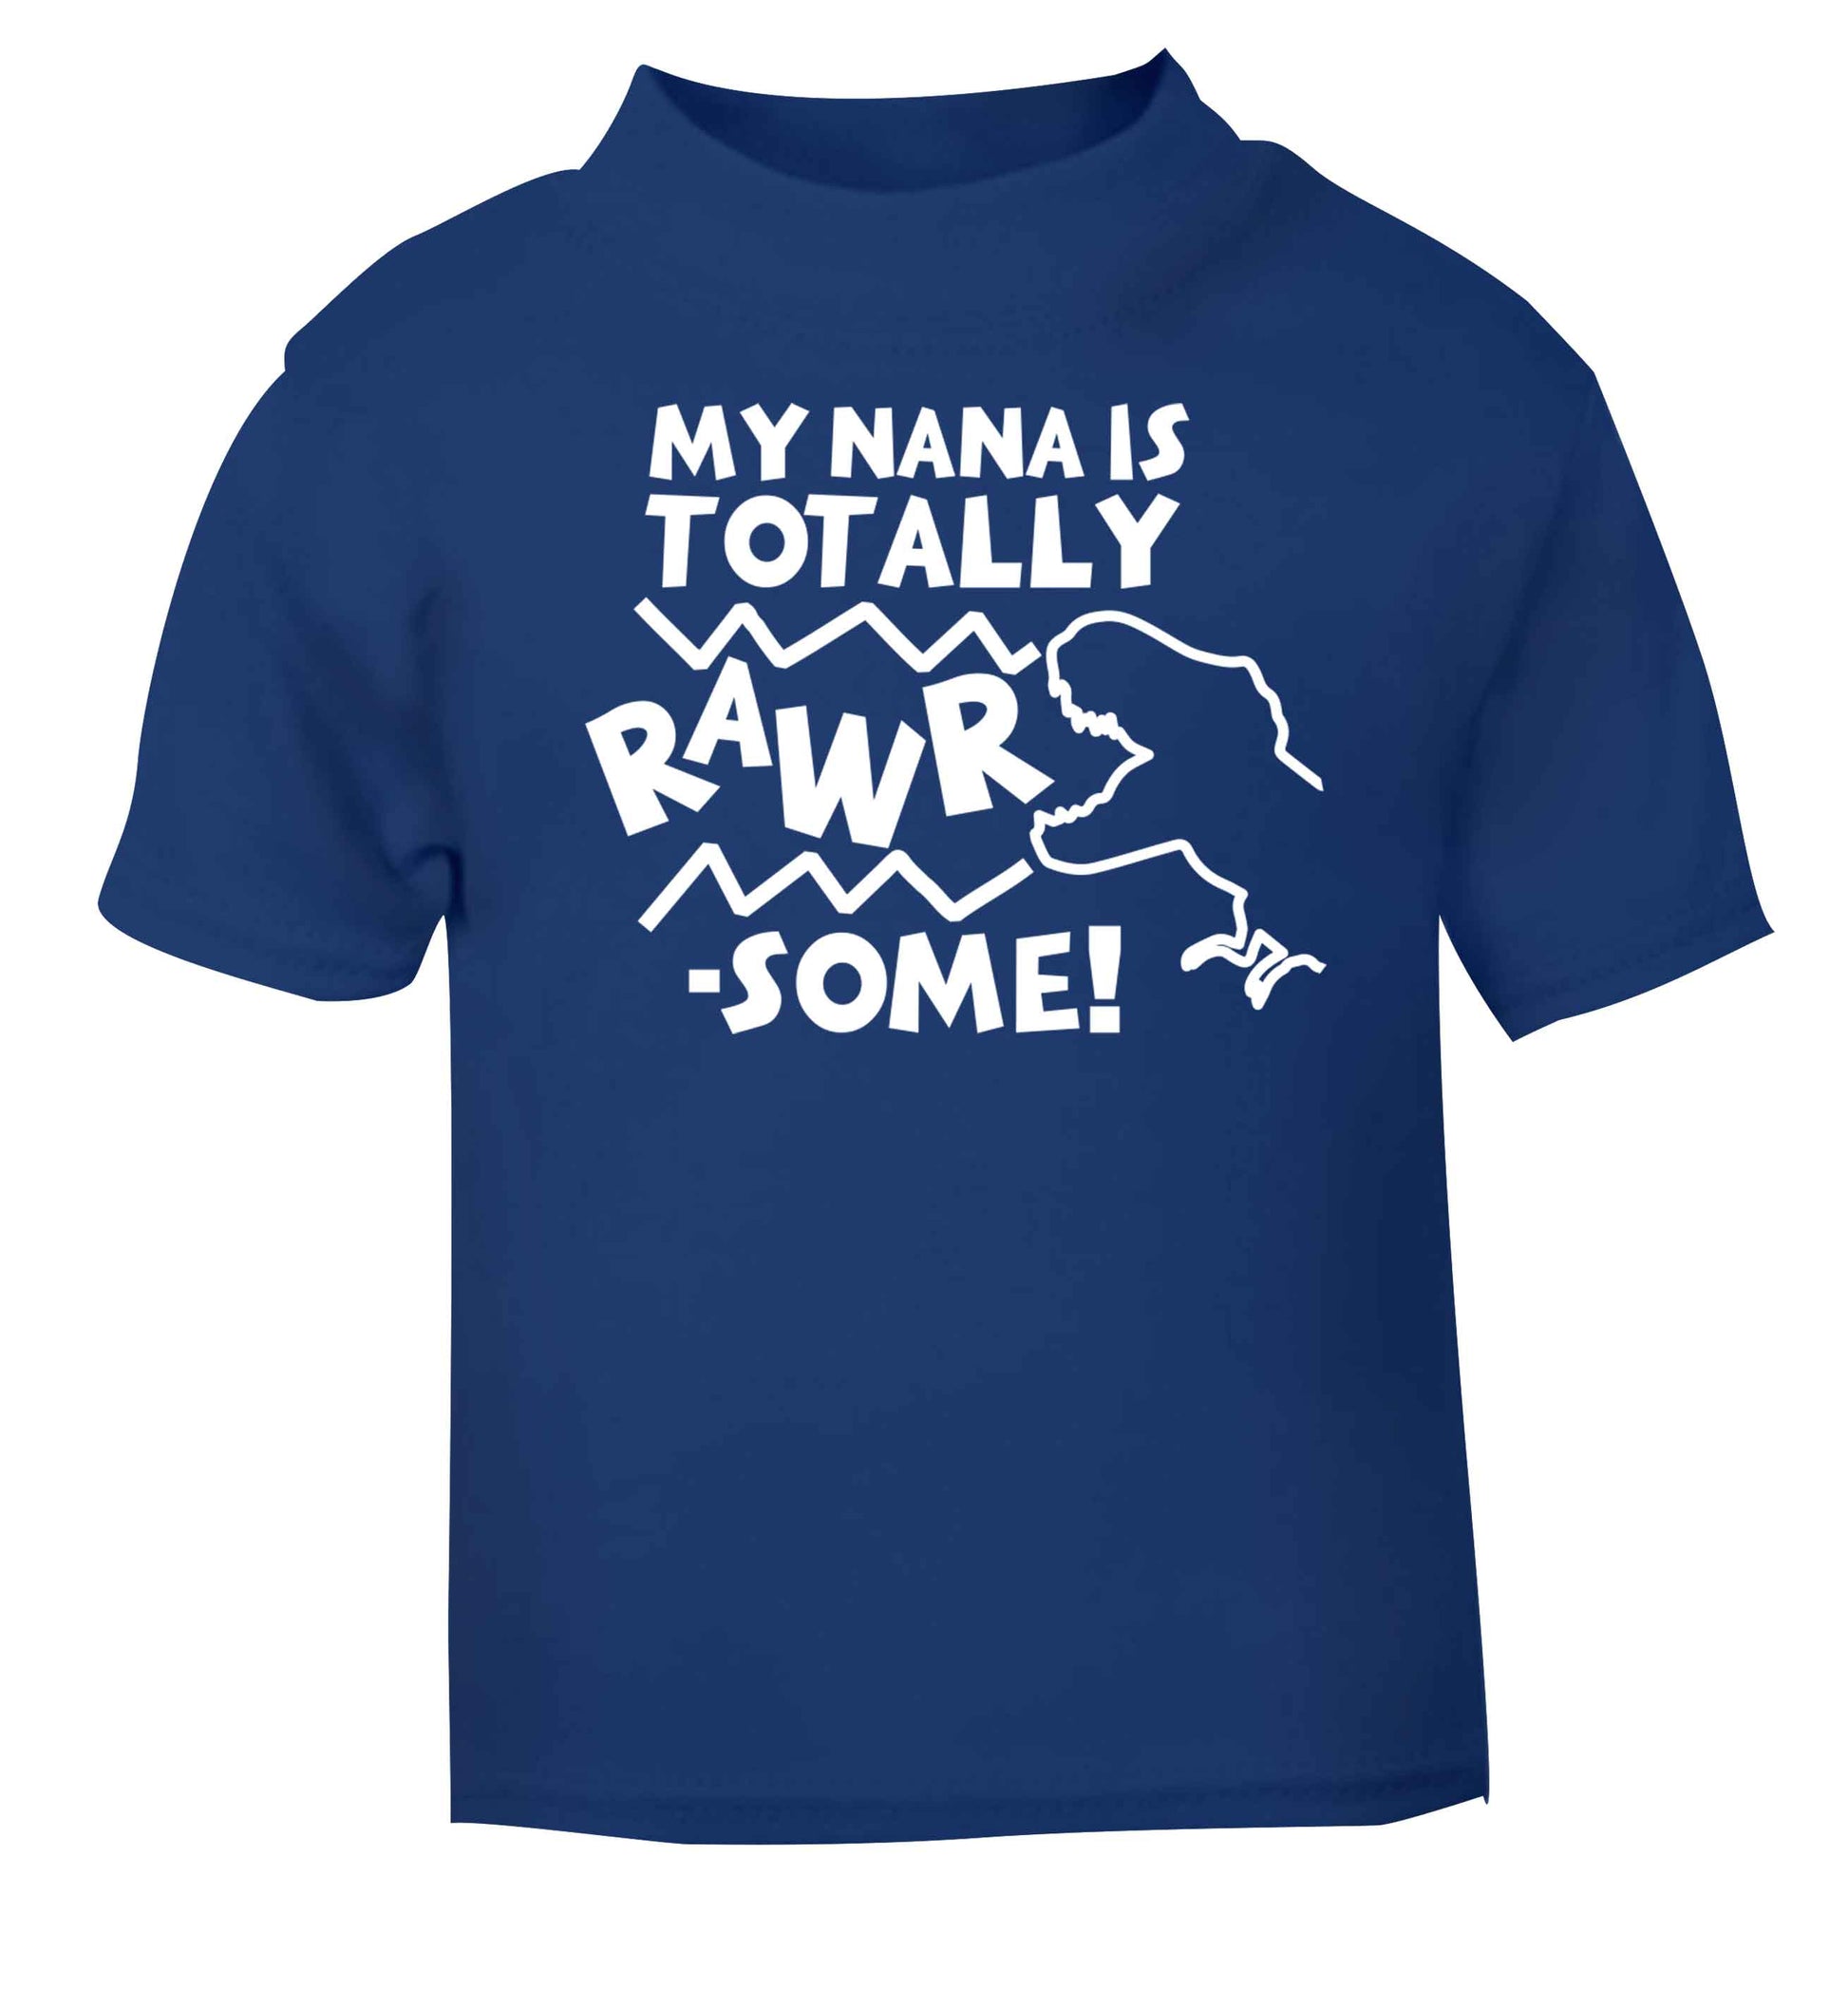 My nana is totally rawrsome blue baby toddler Tshirt 2 Years